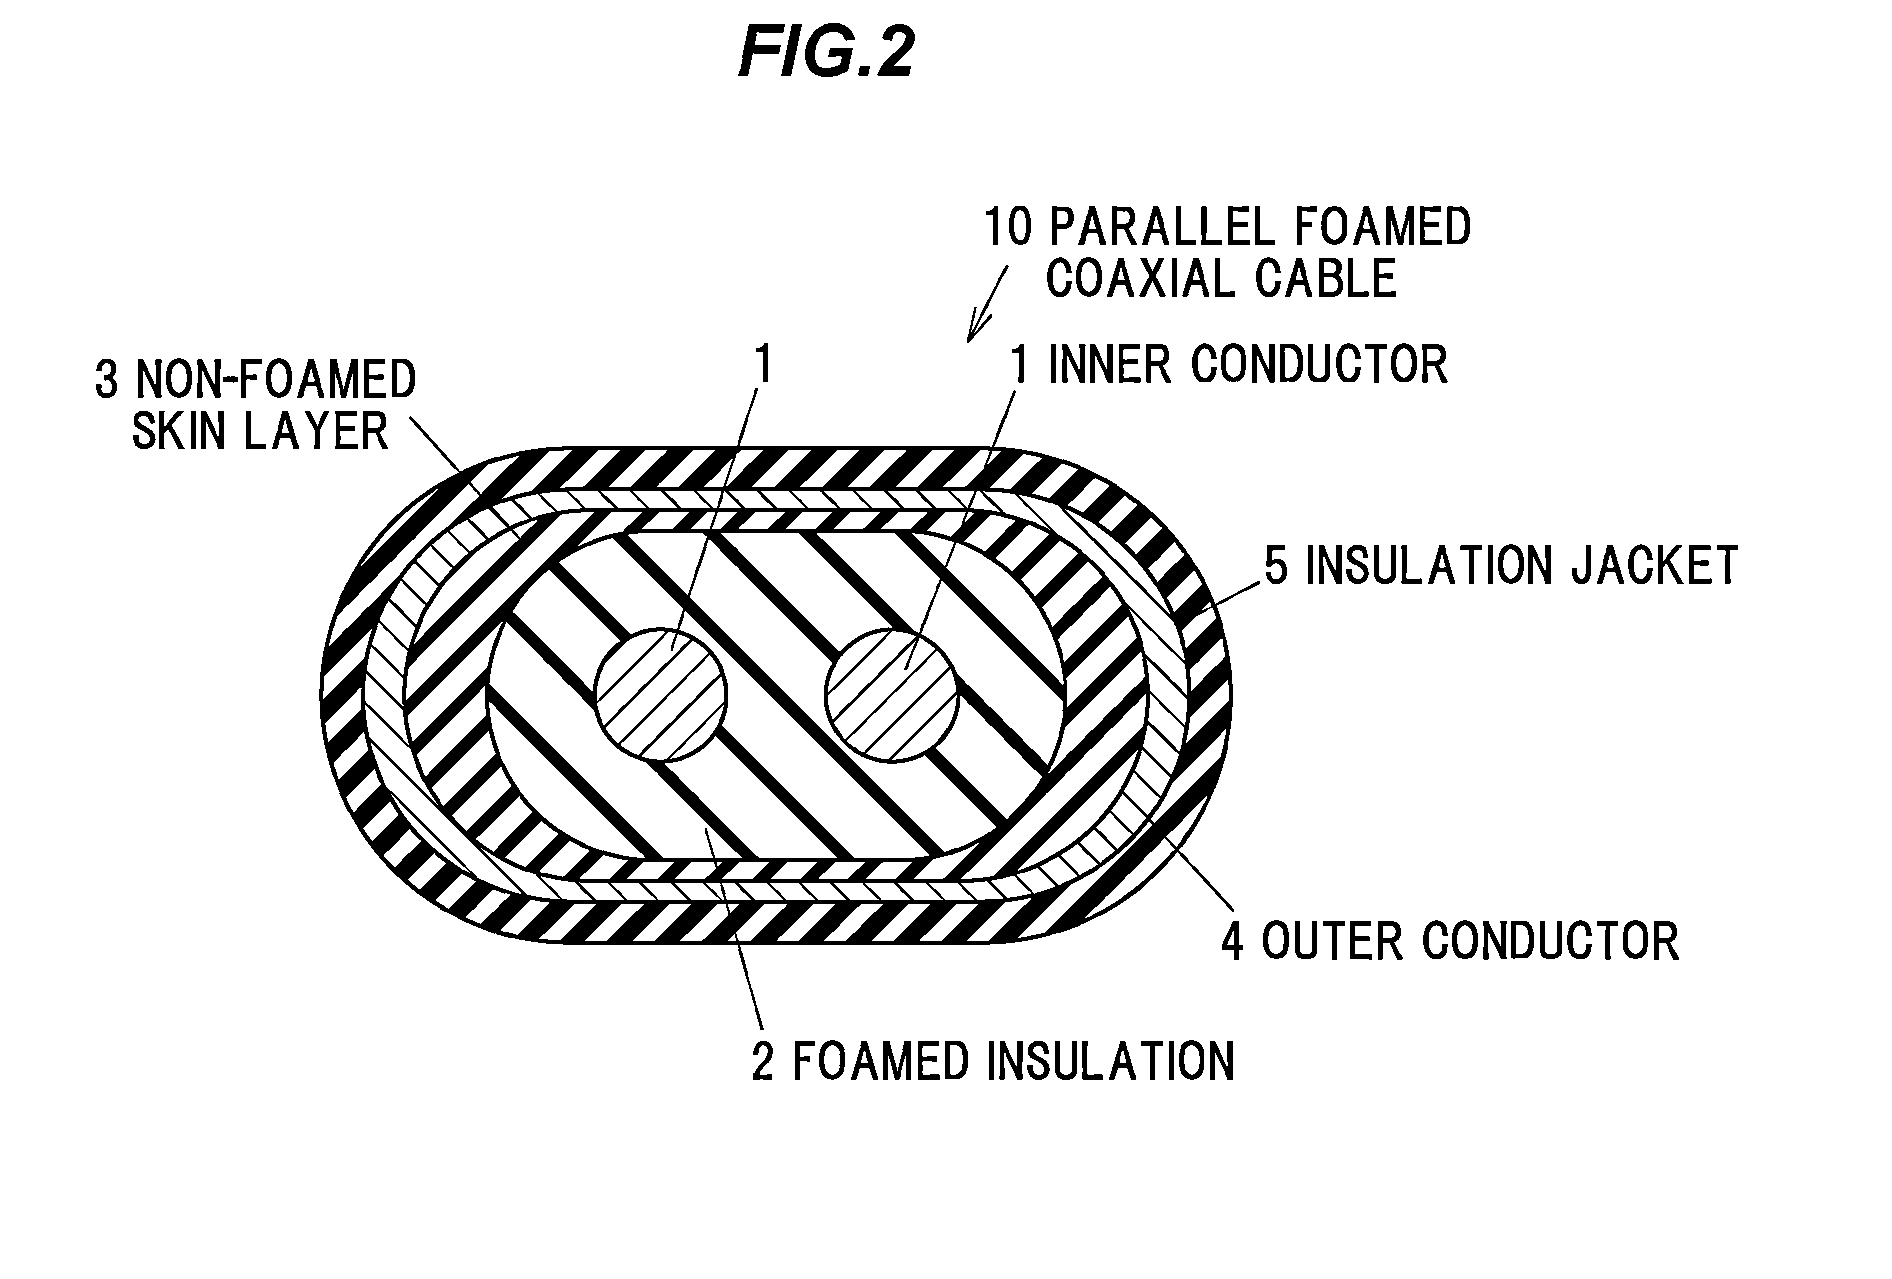 Parallel foamed coaxial cable